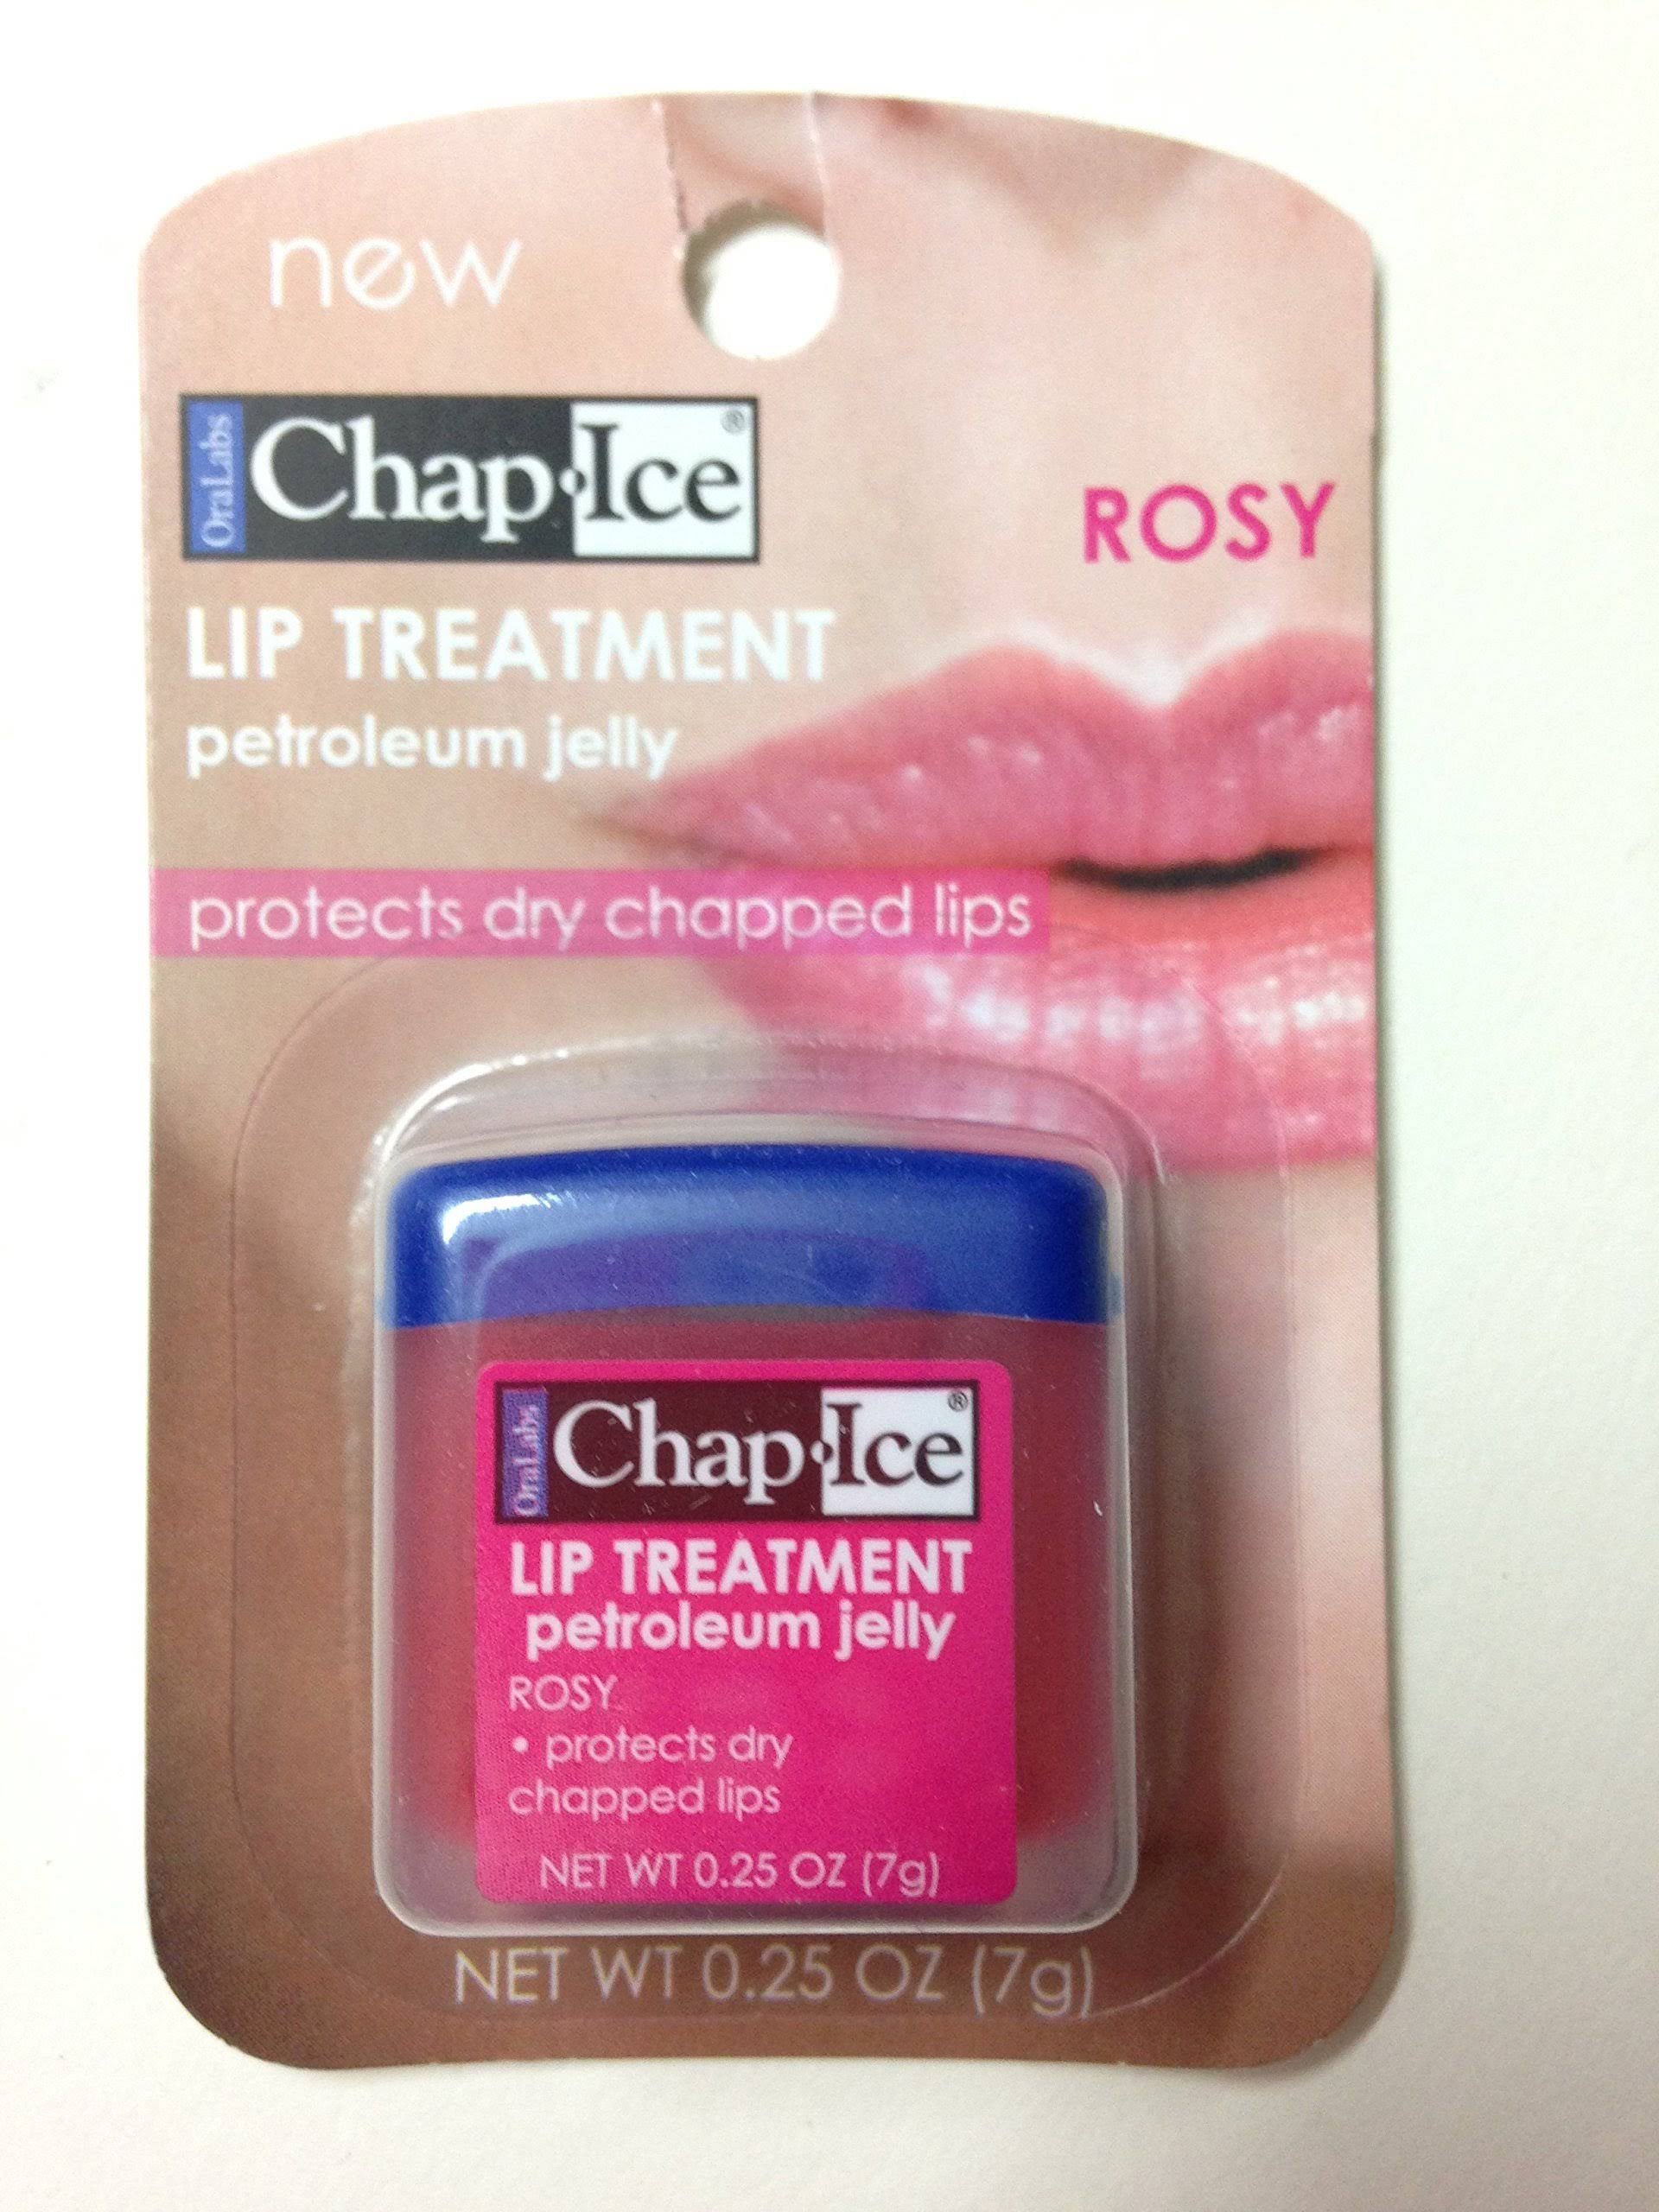 Chap Ice Lip Treatment ROSY Petroleum Jelly 0.25oz protect dry chapped